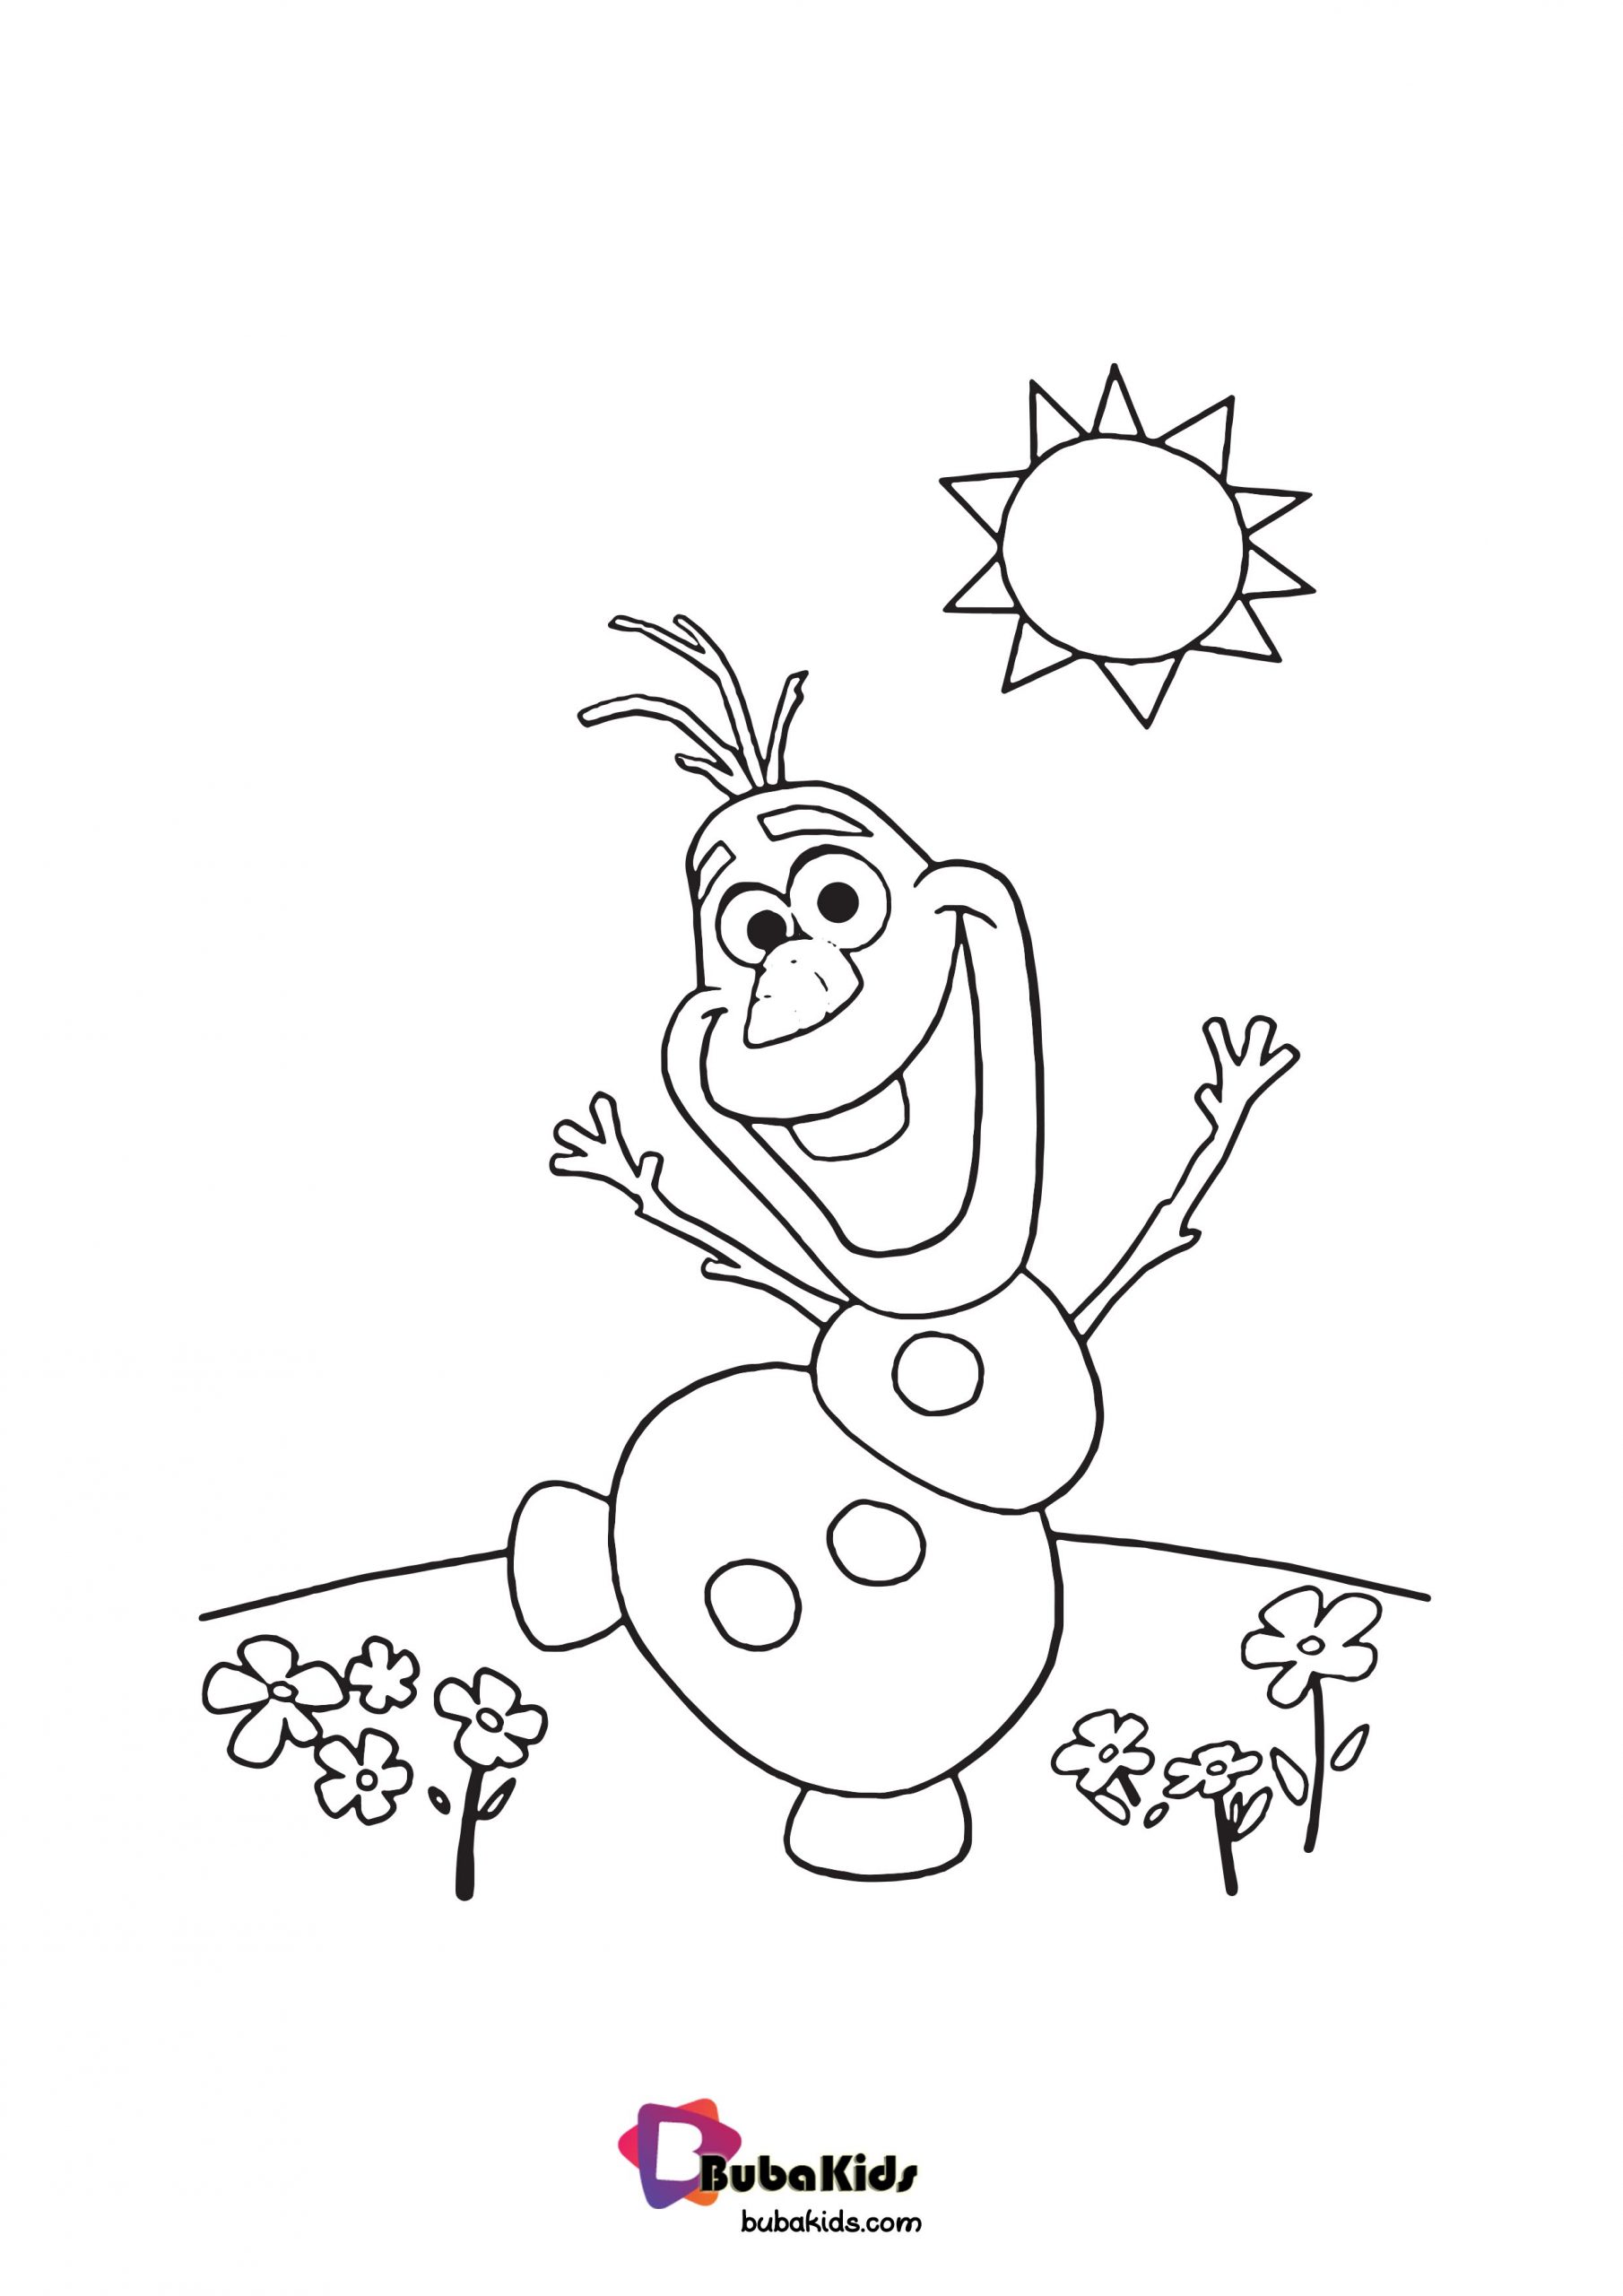 Funny Olaf Disney Coloring Page Wallpaper